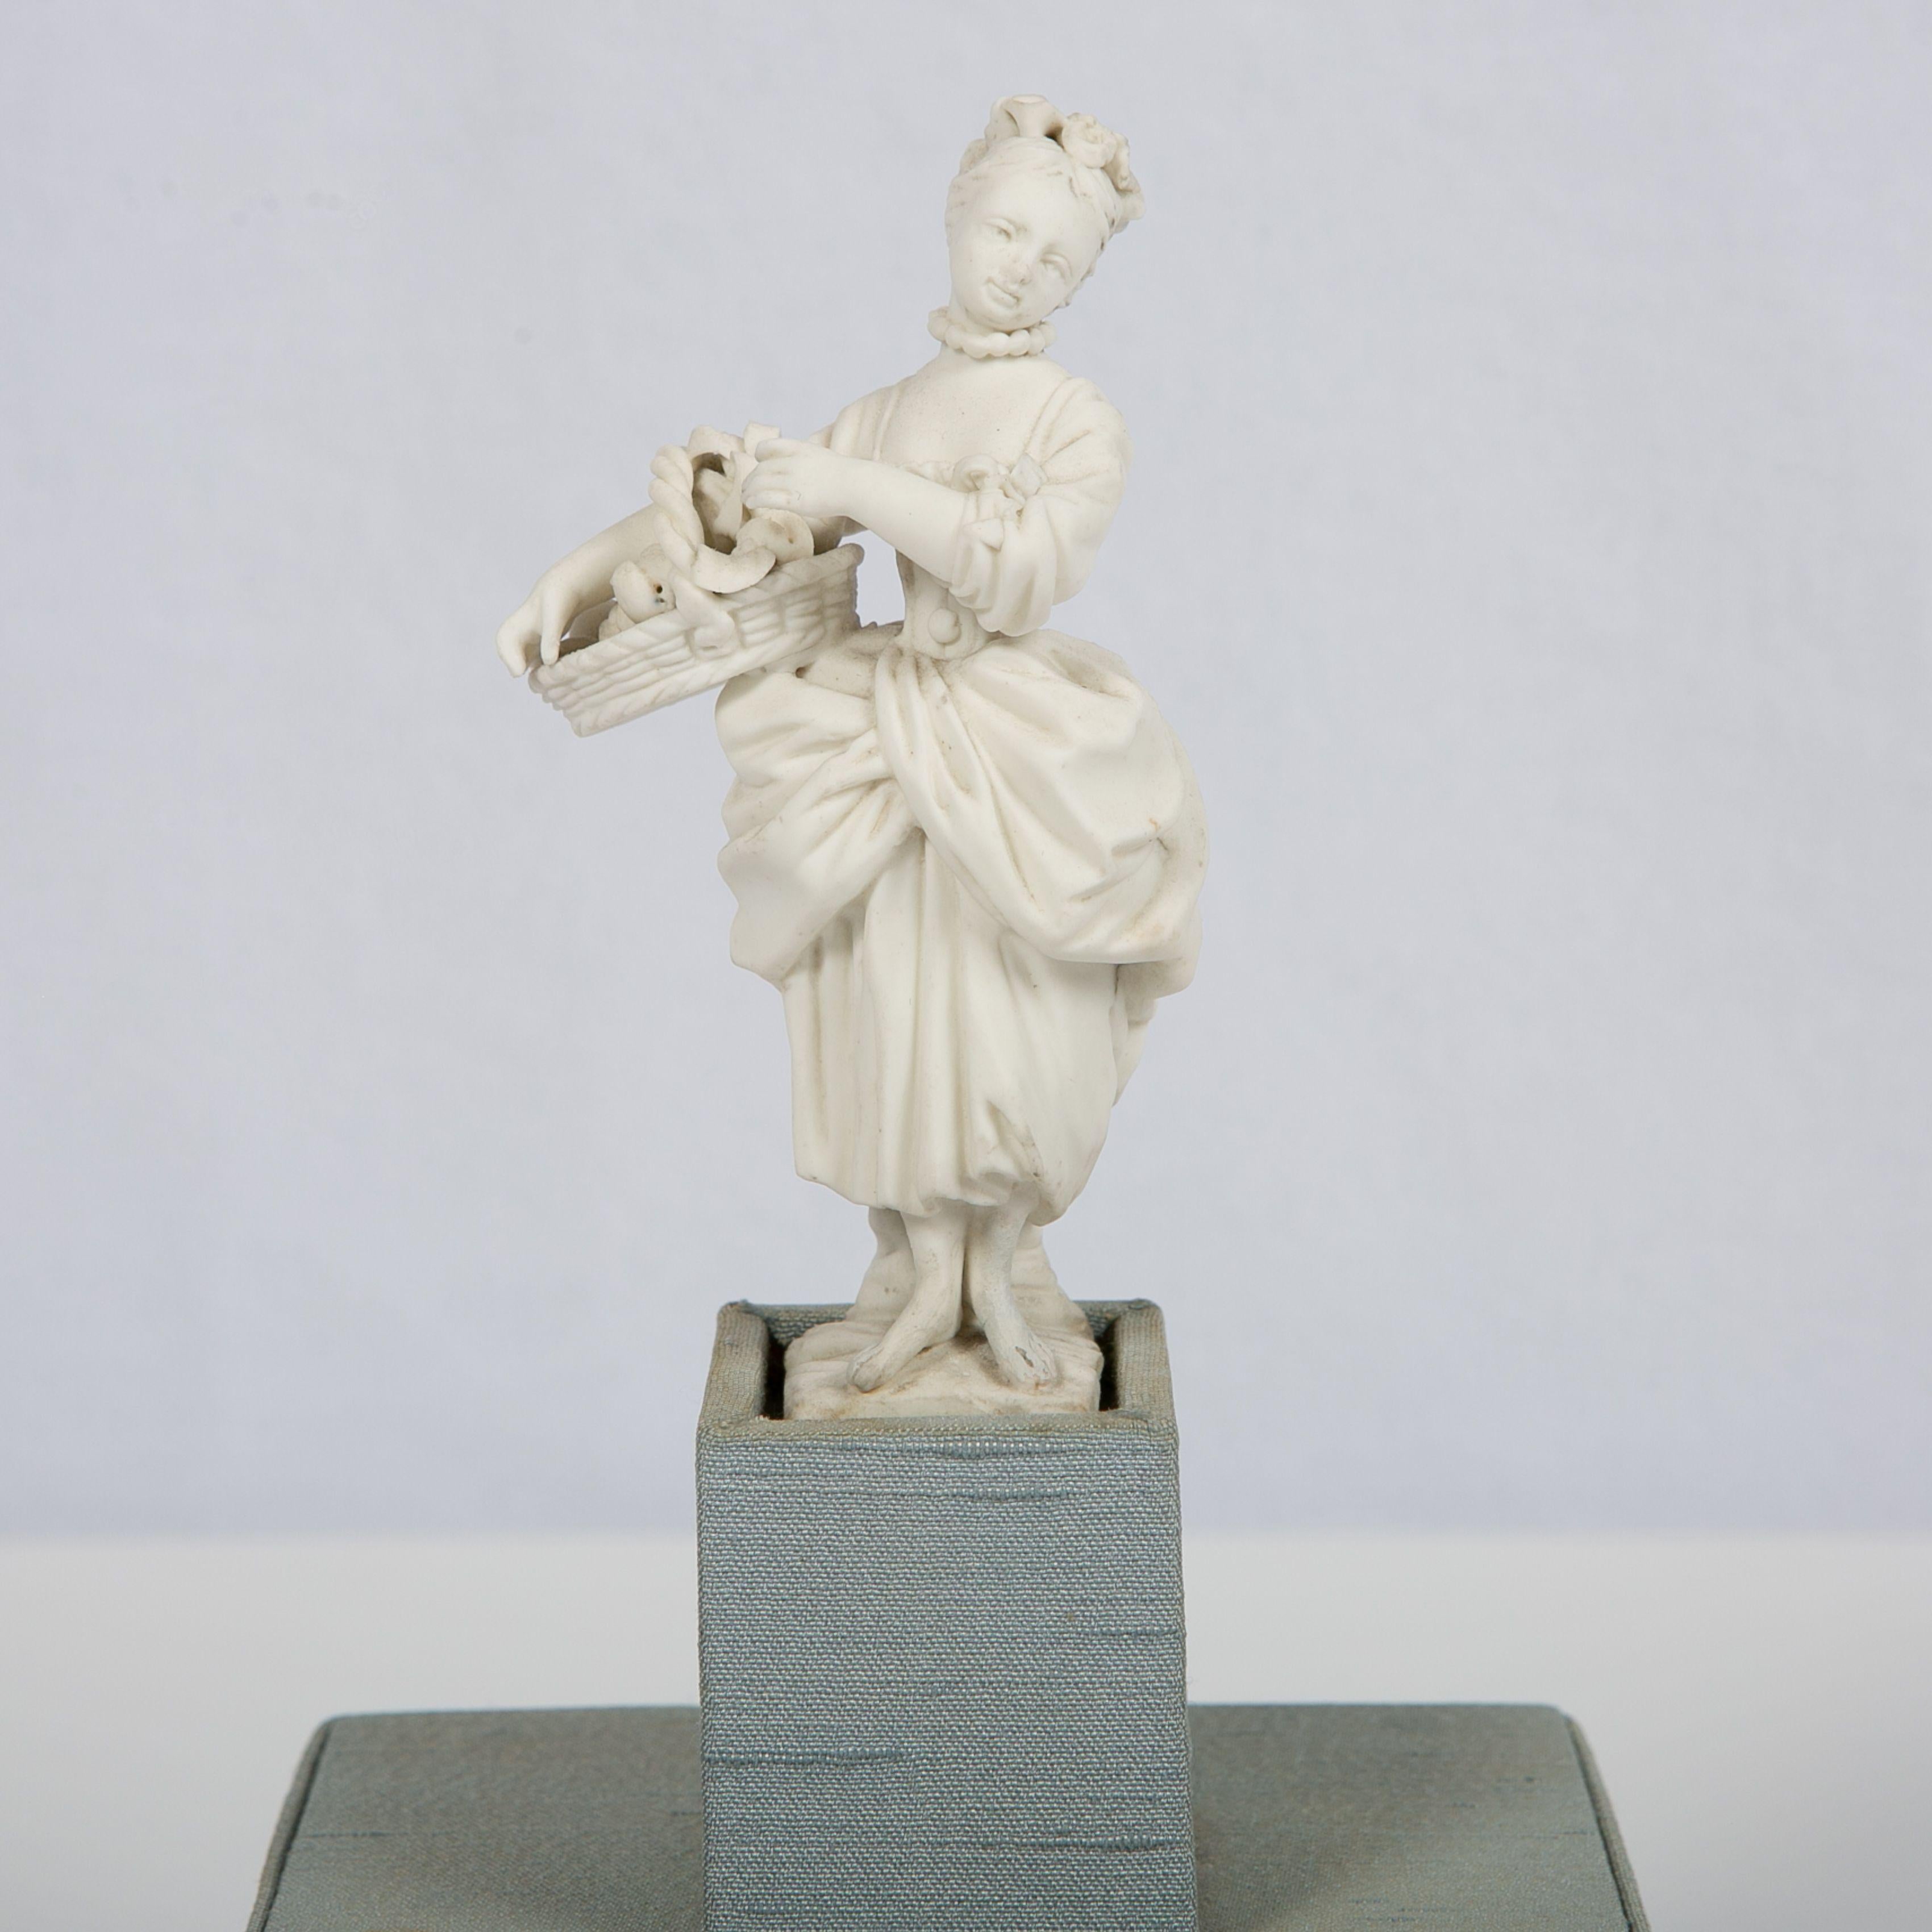 European Small Bisque Figure of Girl Made by Mennecy in 18th Century France